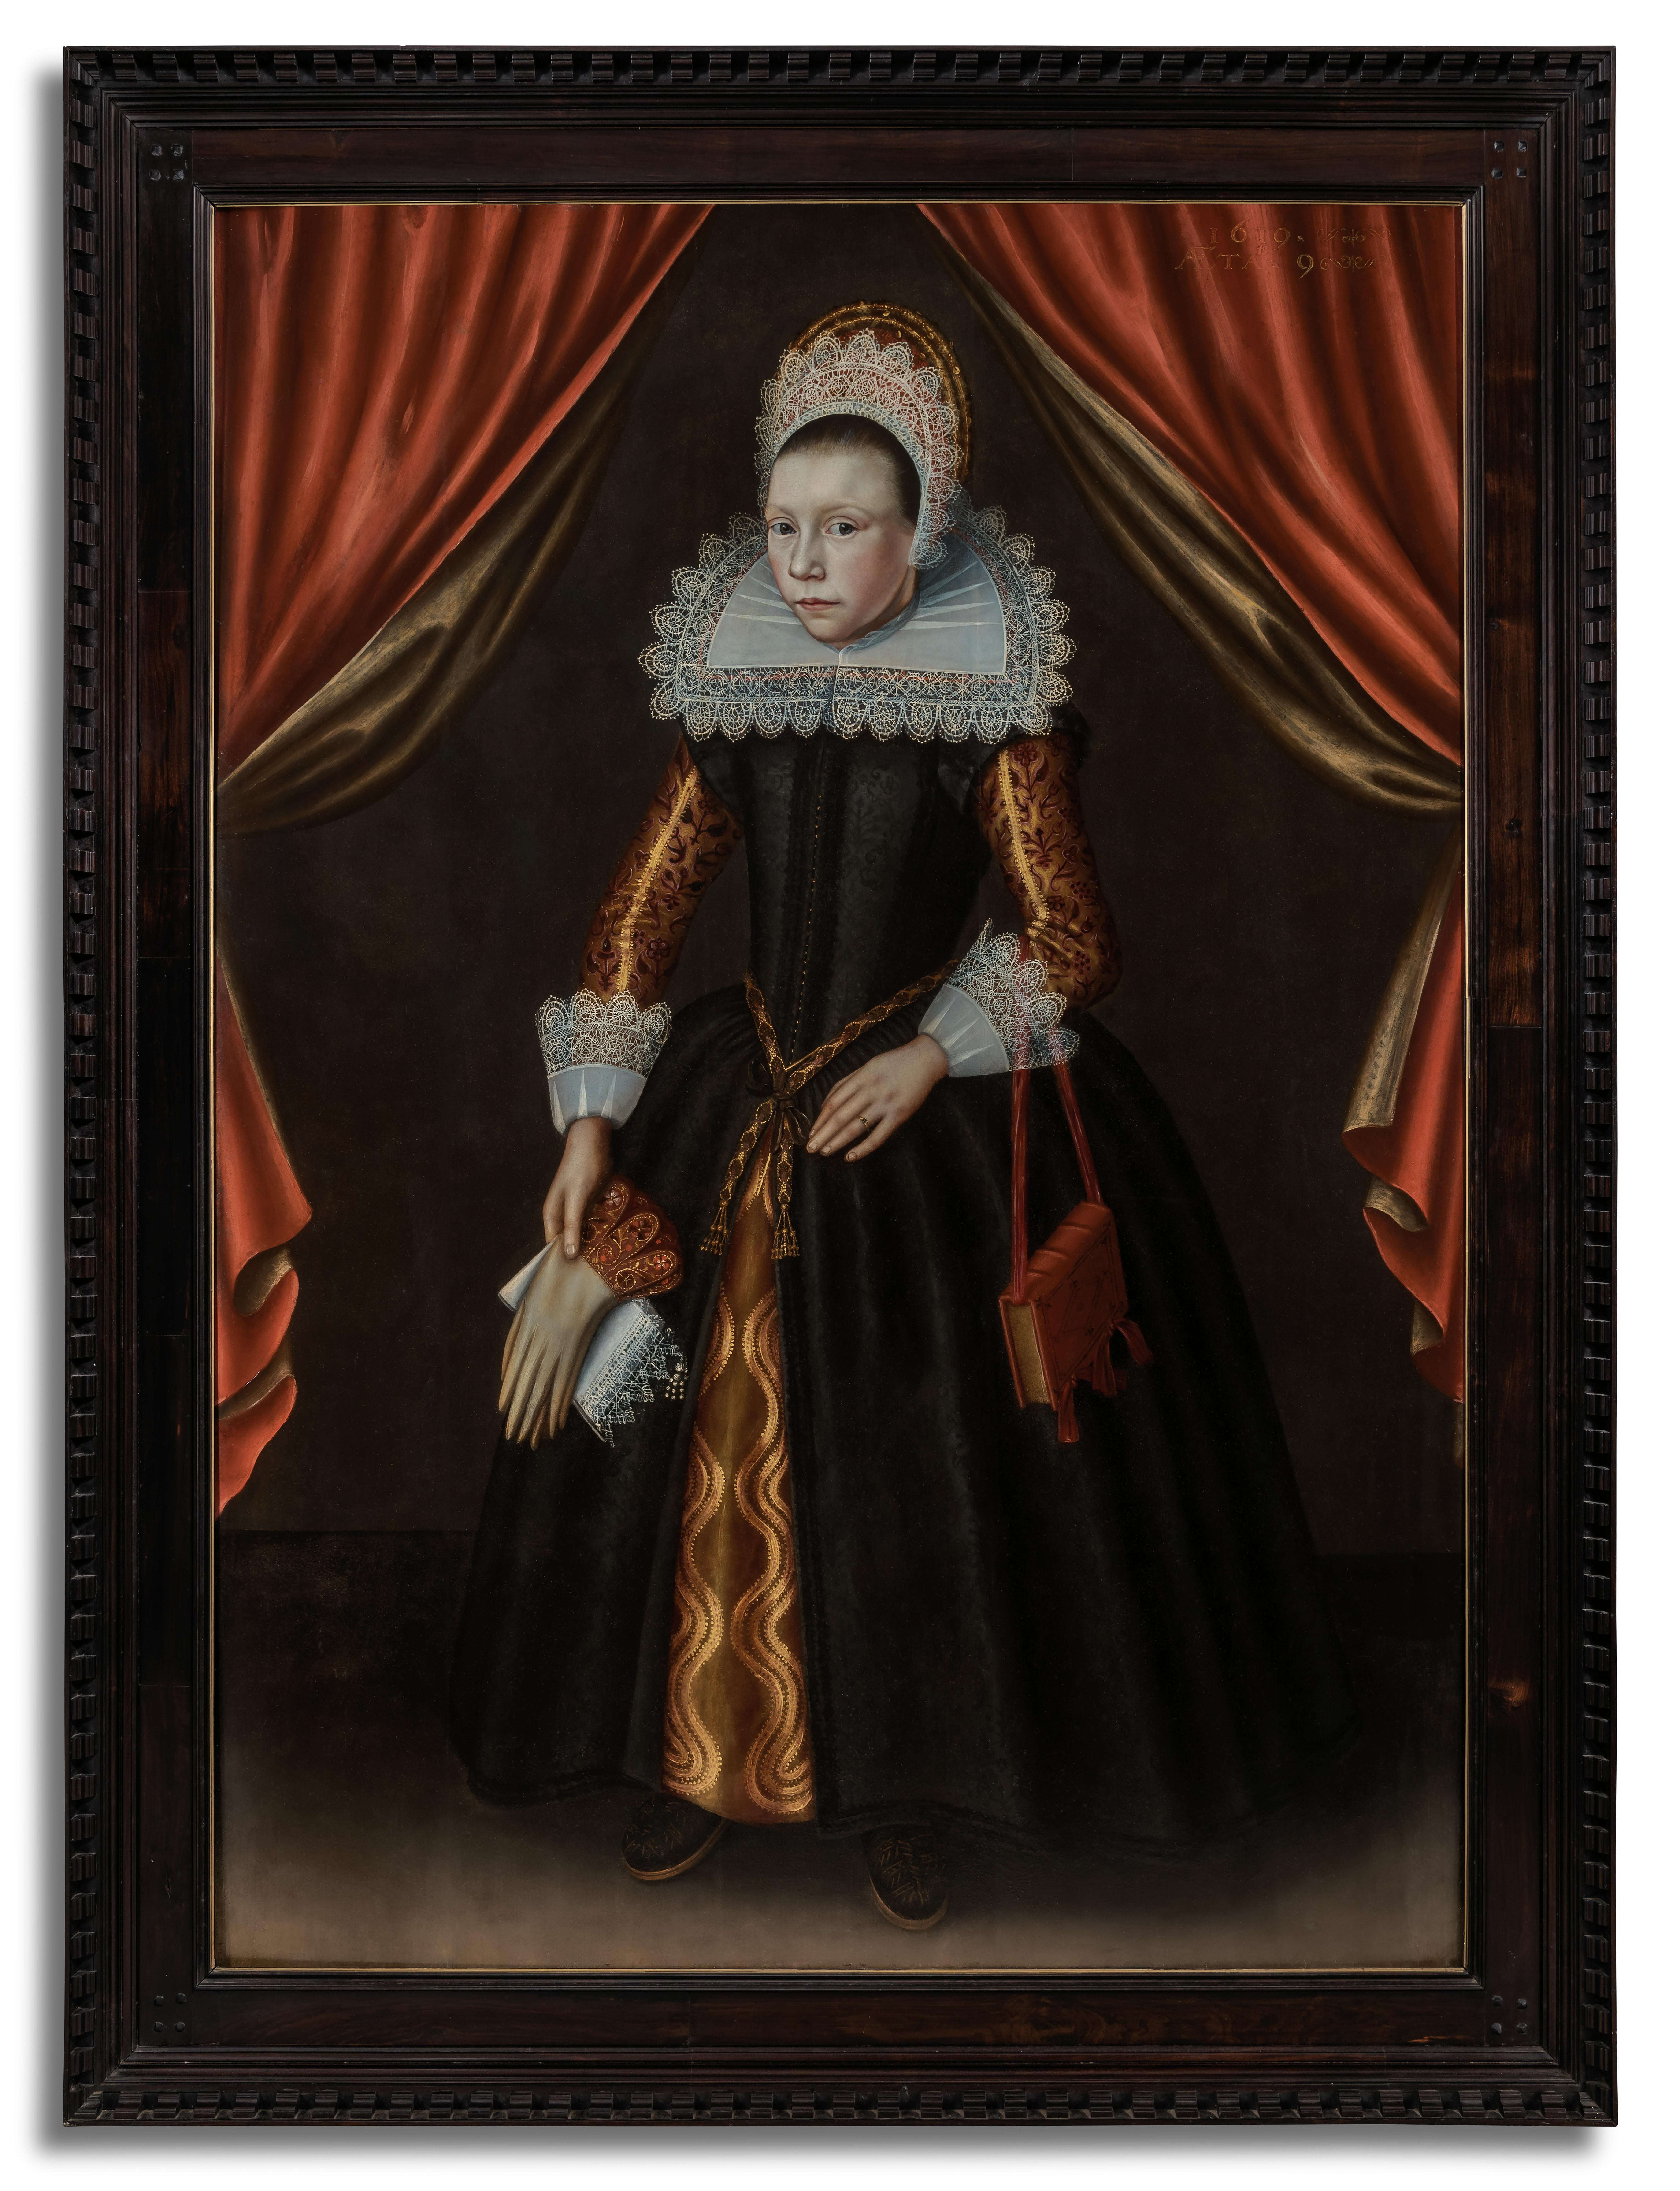 Dutch Old Master Portrait of Girl aged 9 in Black Dress & Lace Ruff dated 1619